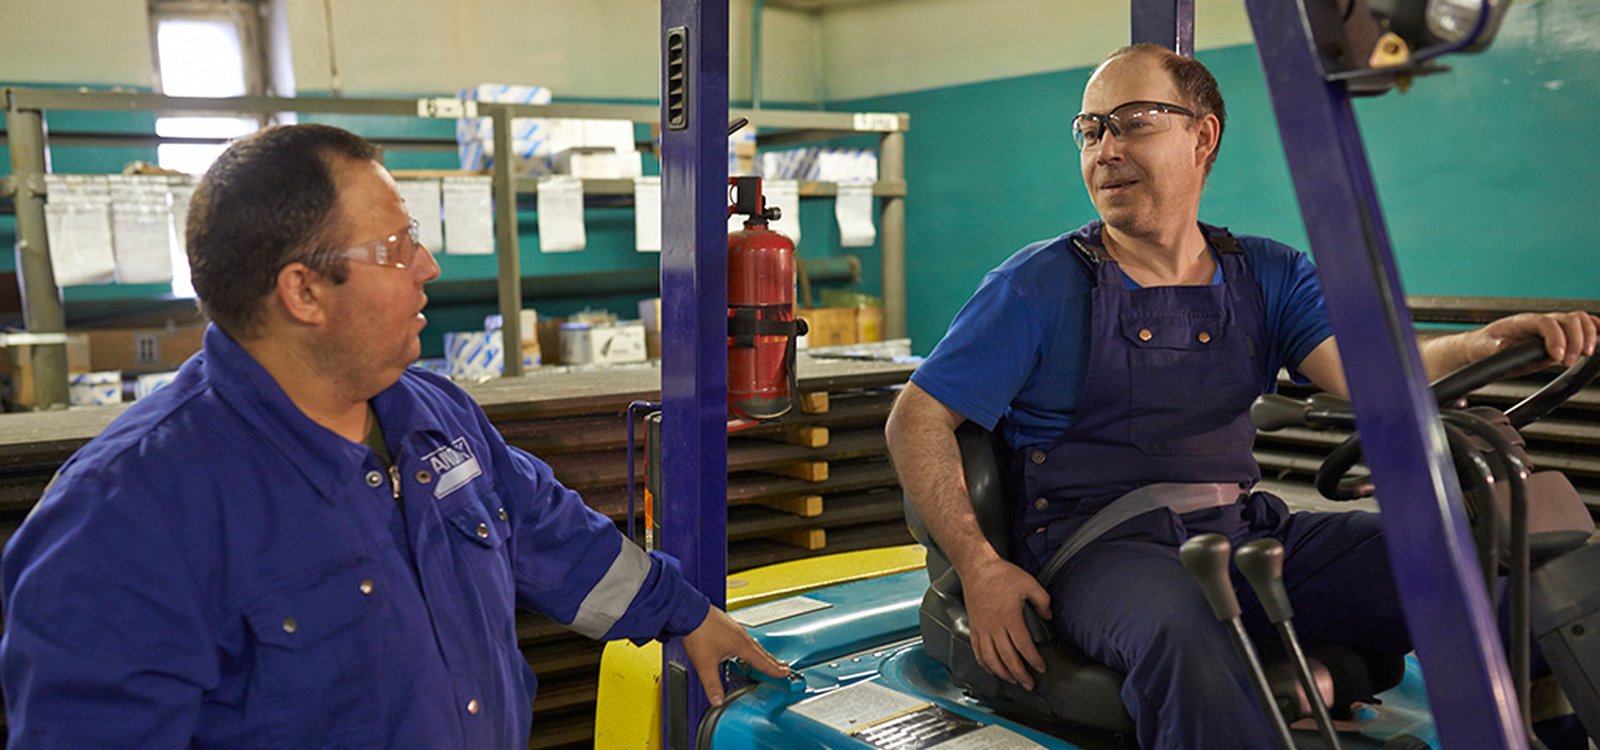 In November 2014, Sandvik Norilsk reached 1,200 consecutive days without a lost-time injury.